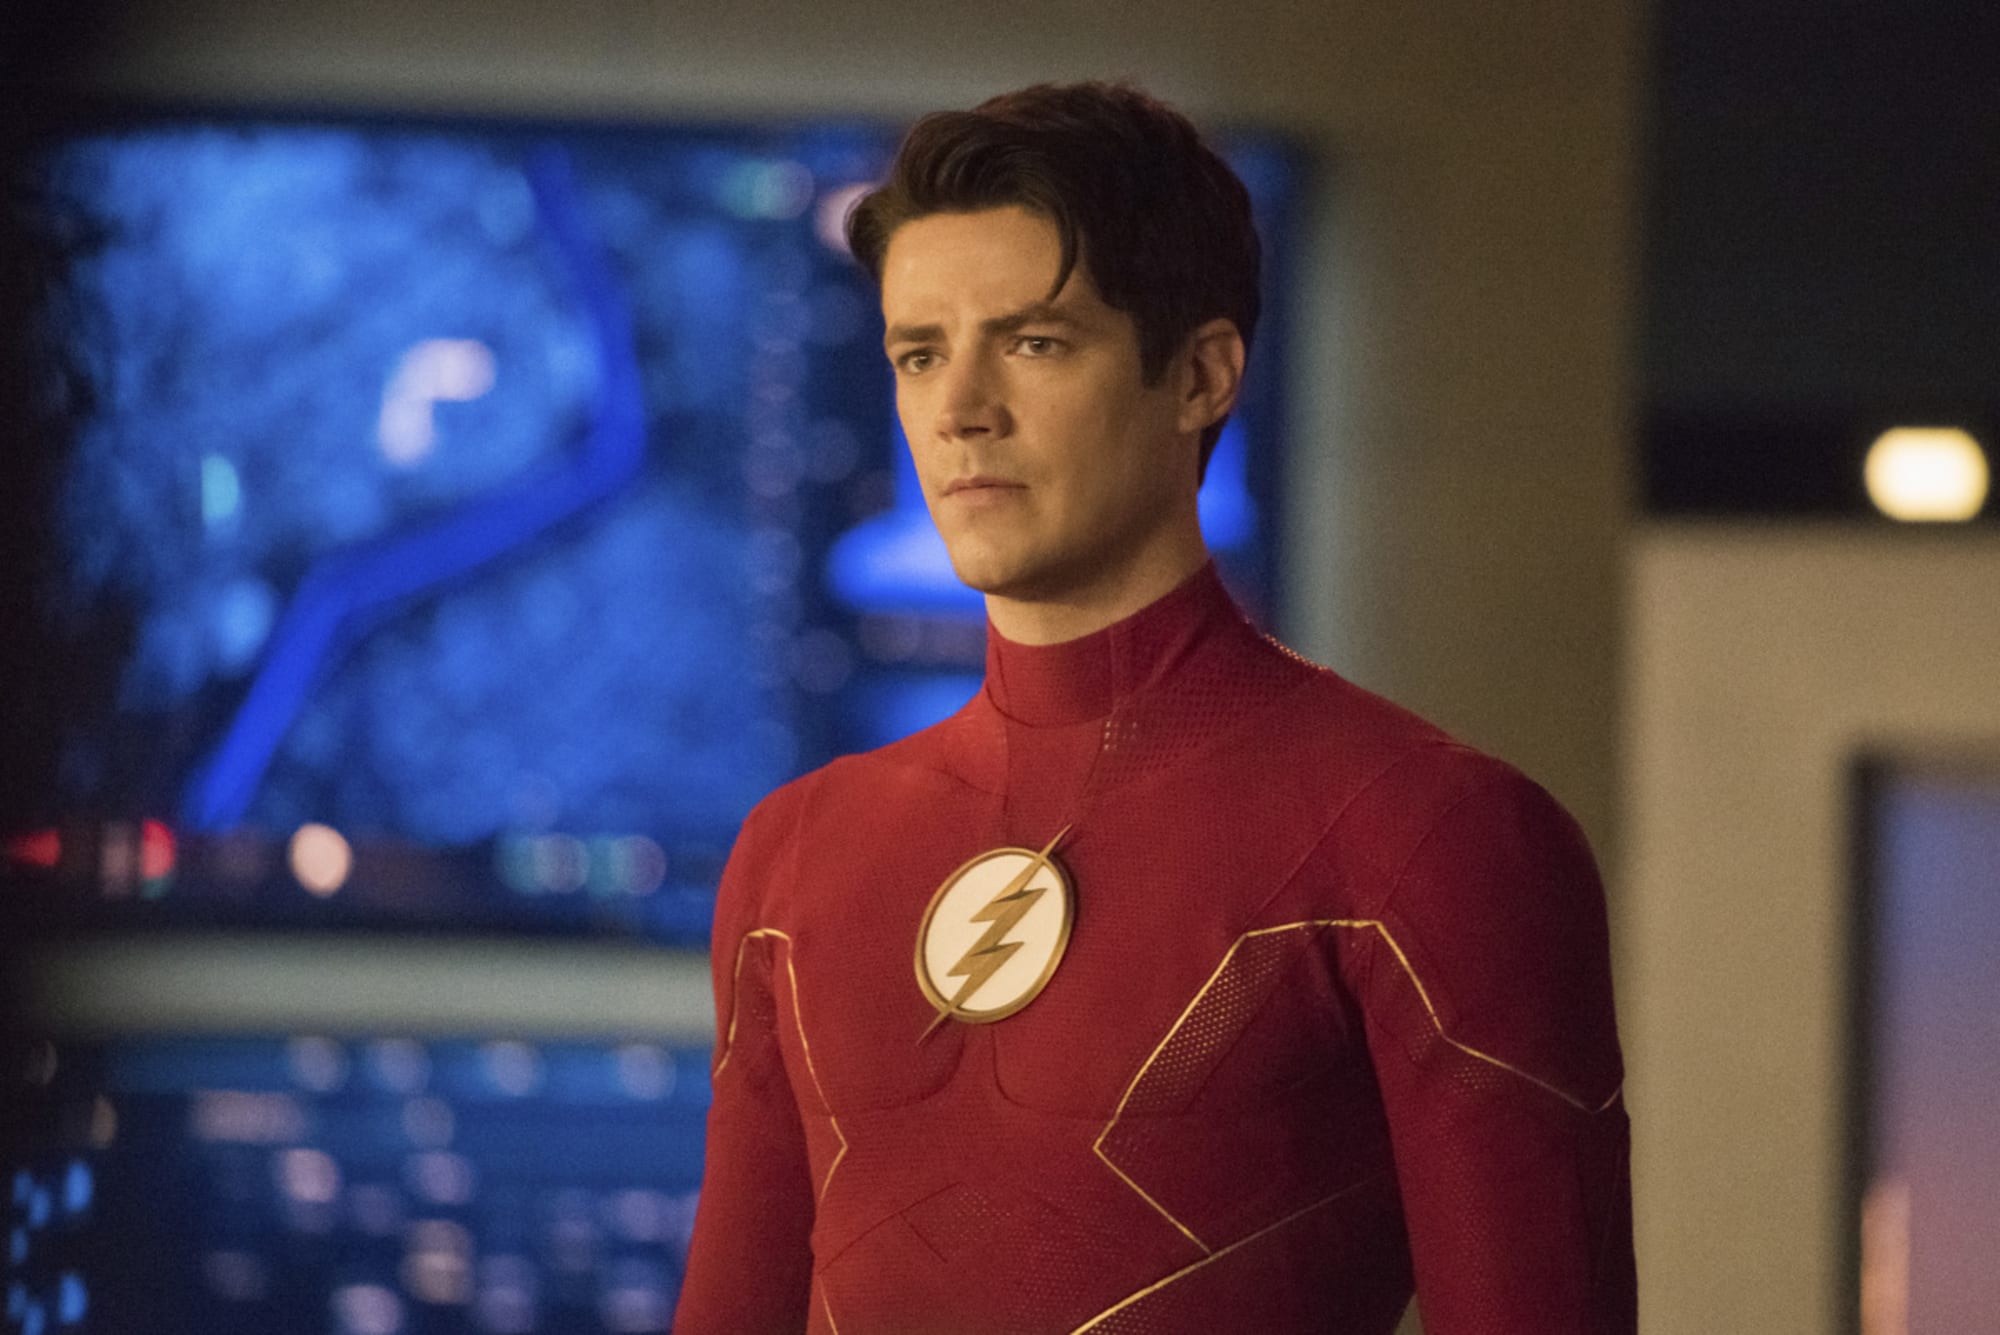 The Flash season 7 ending explained: Why [SPOILER] betrayed Team Flash